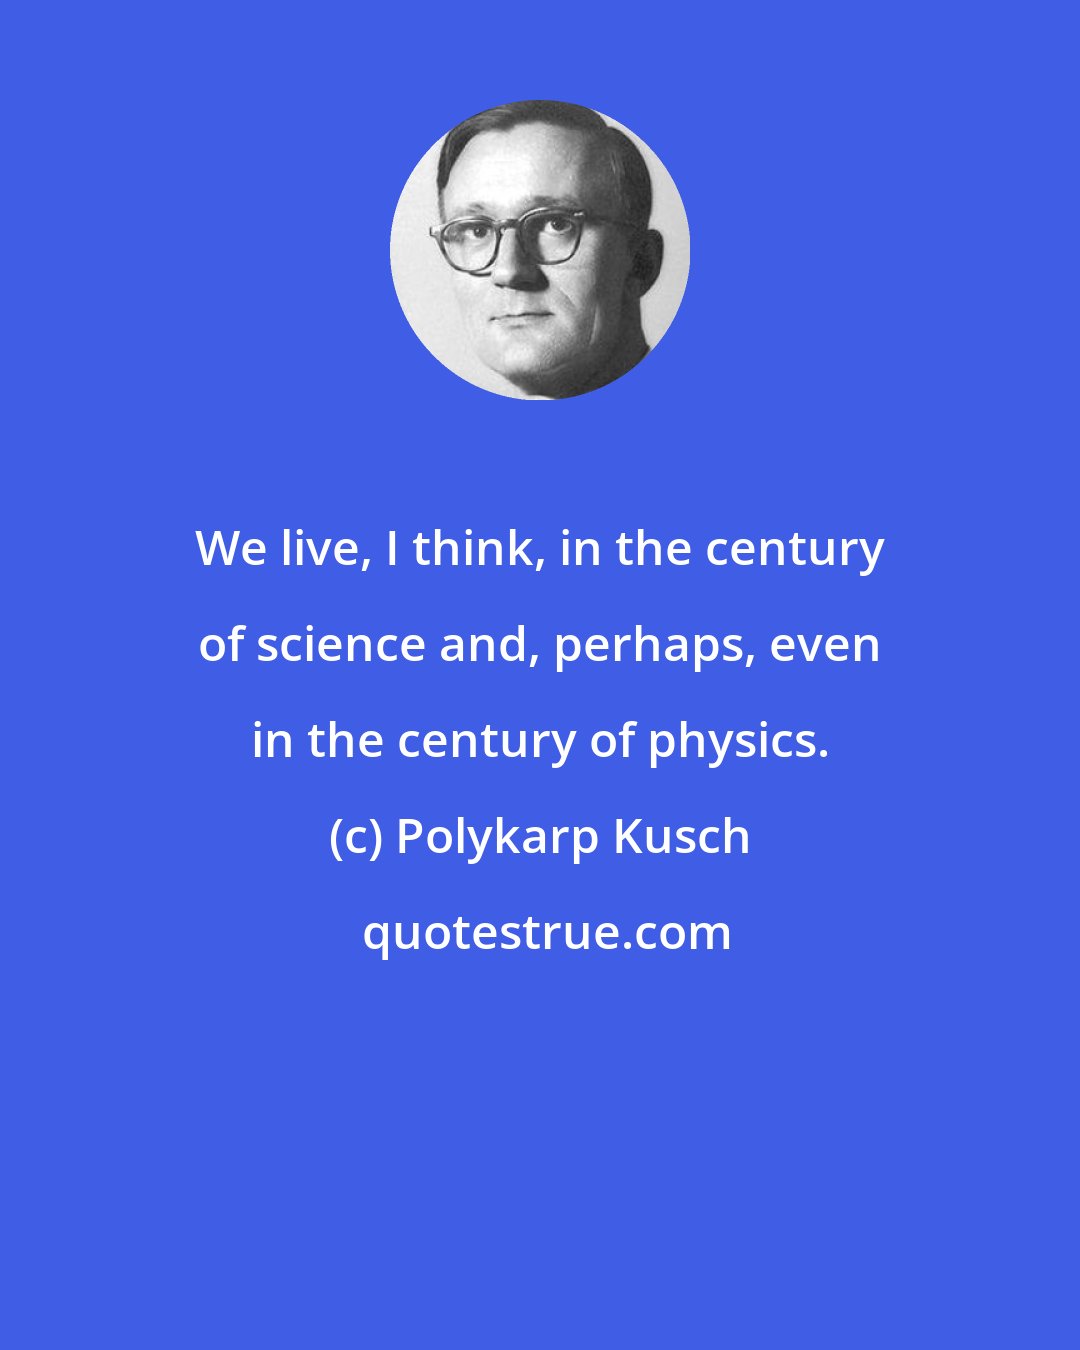 Polykarp Kusch: We live, I think, in the century of science and, perhaps, even in the century of physics.